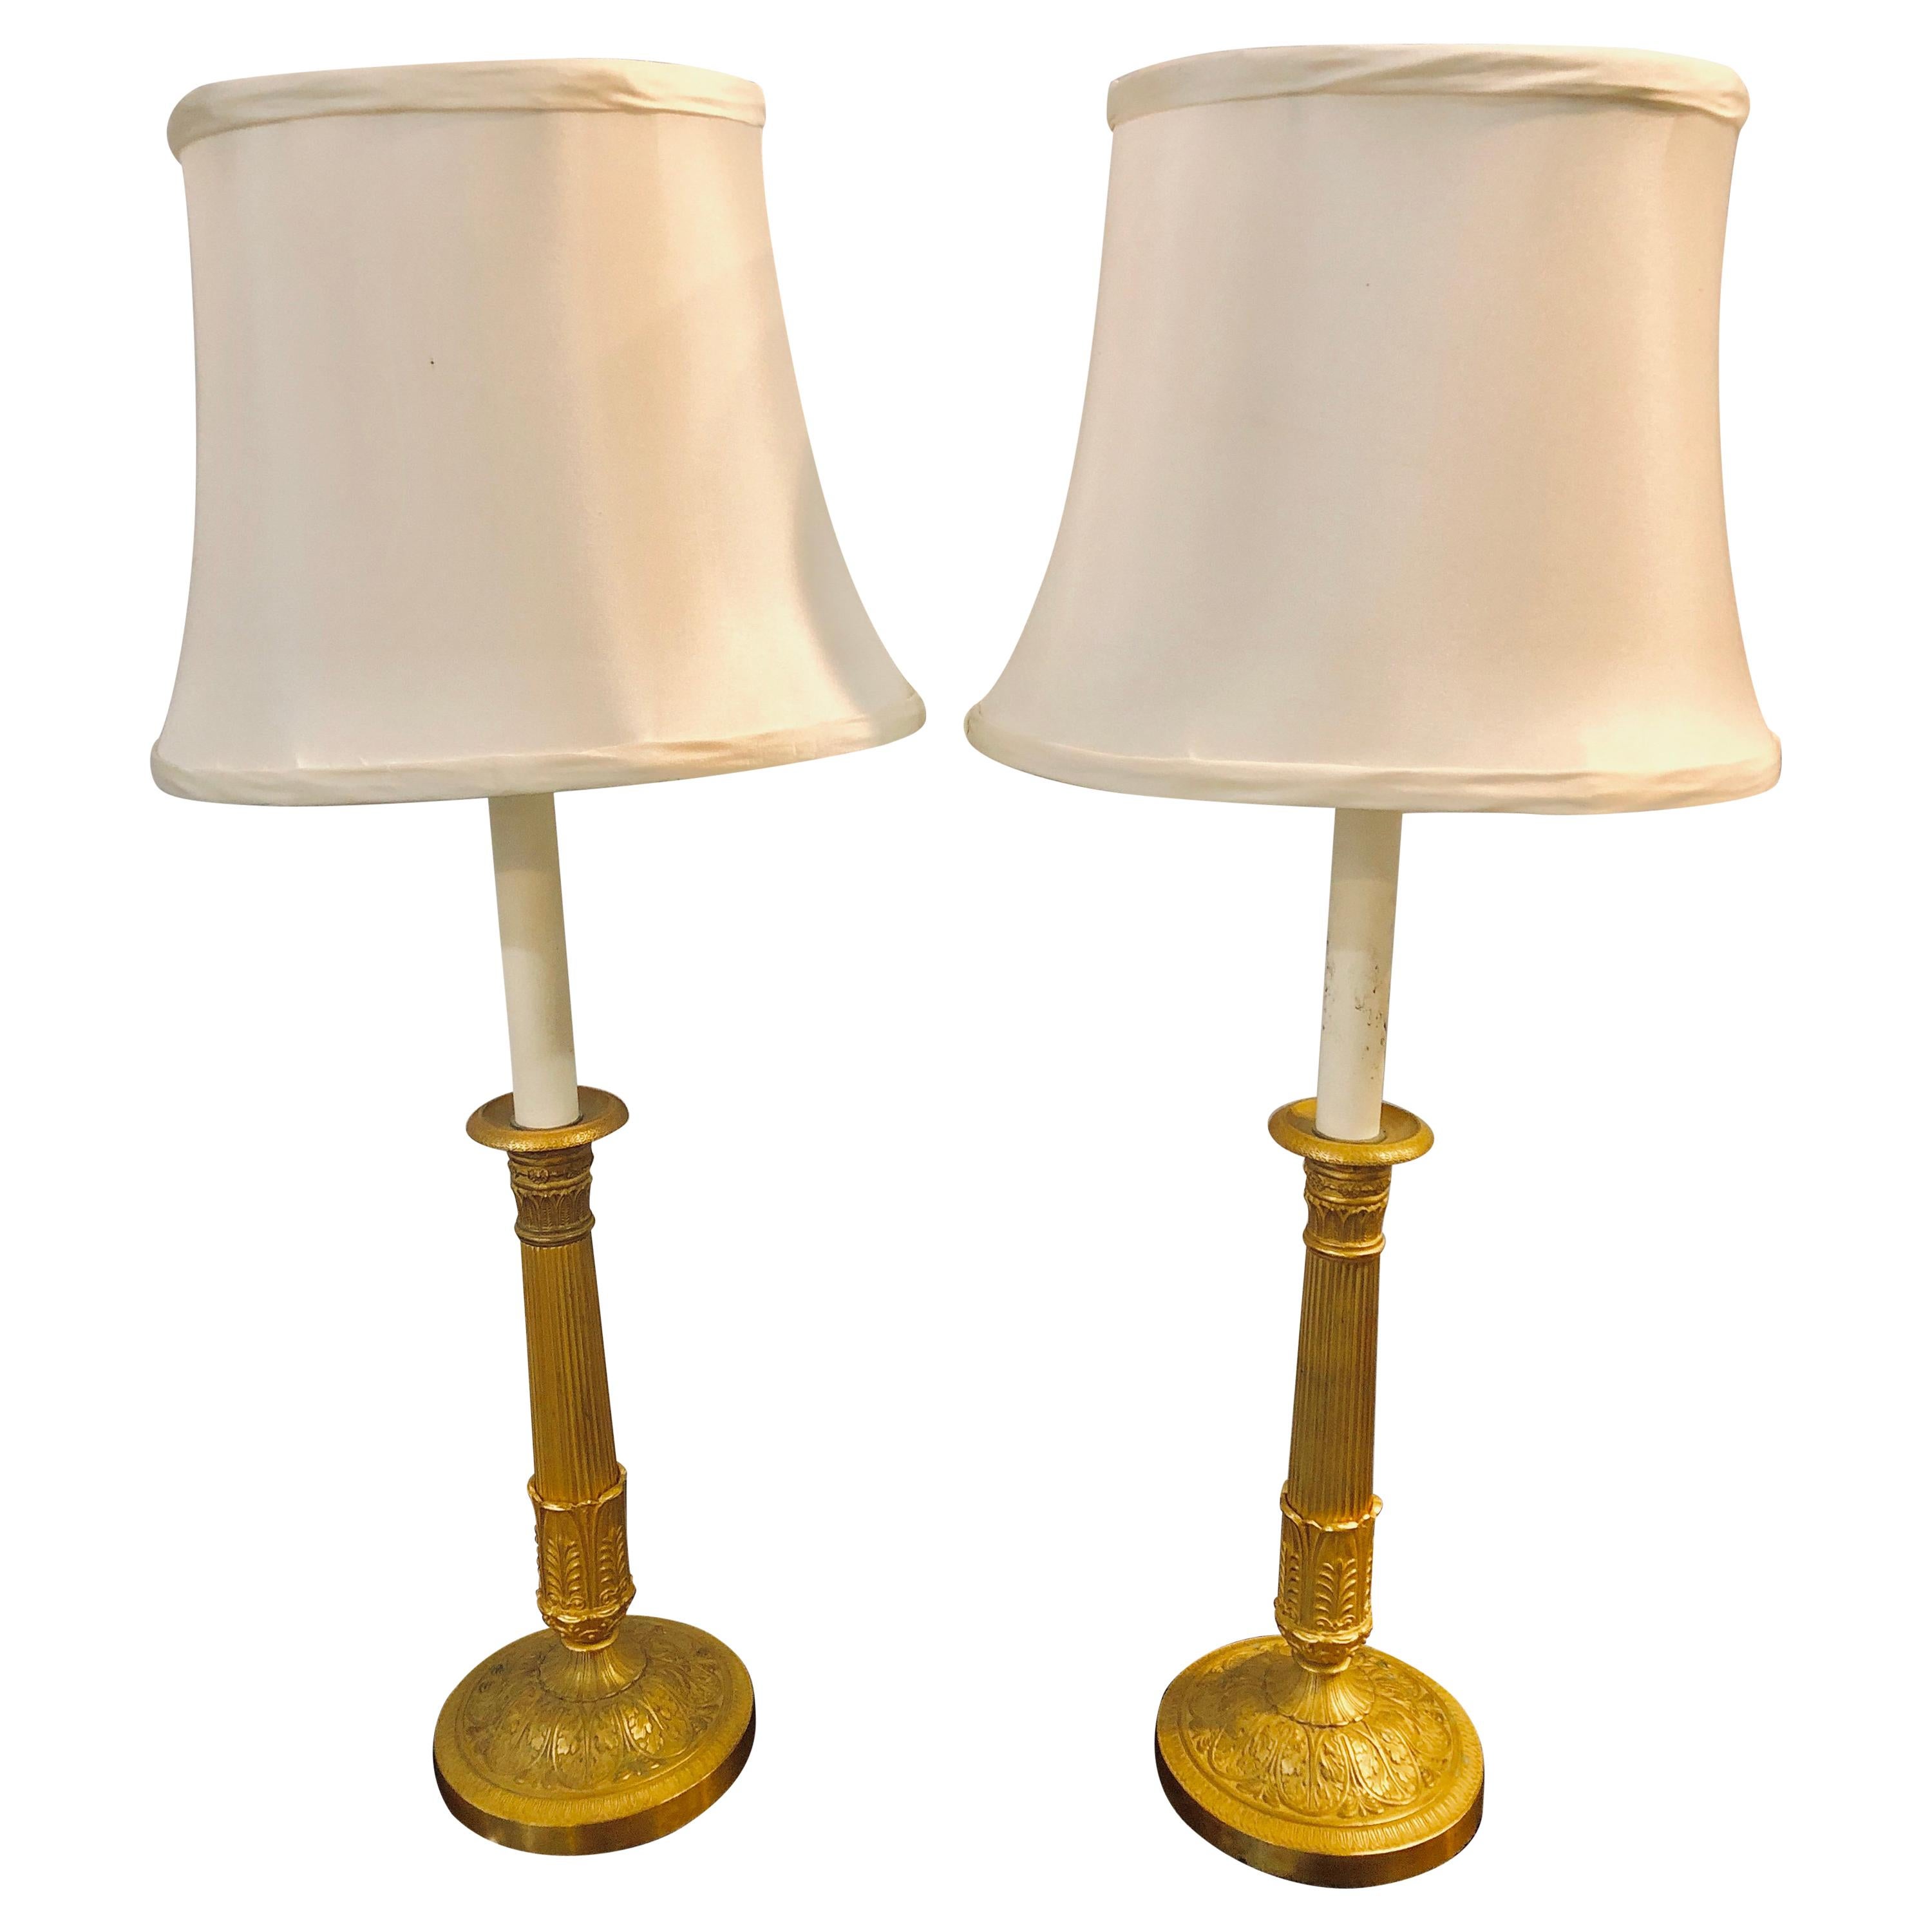 Pair of Empire Bronze Candleprick 19th Century Table Lamps with Custom Shades